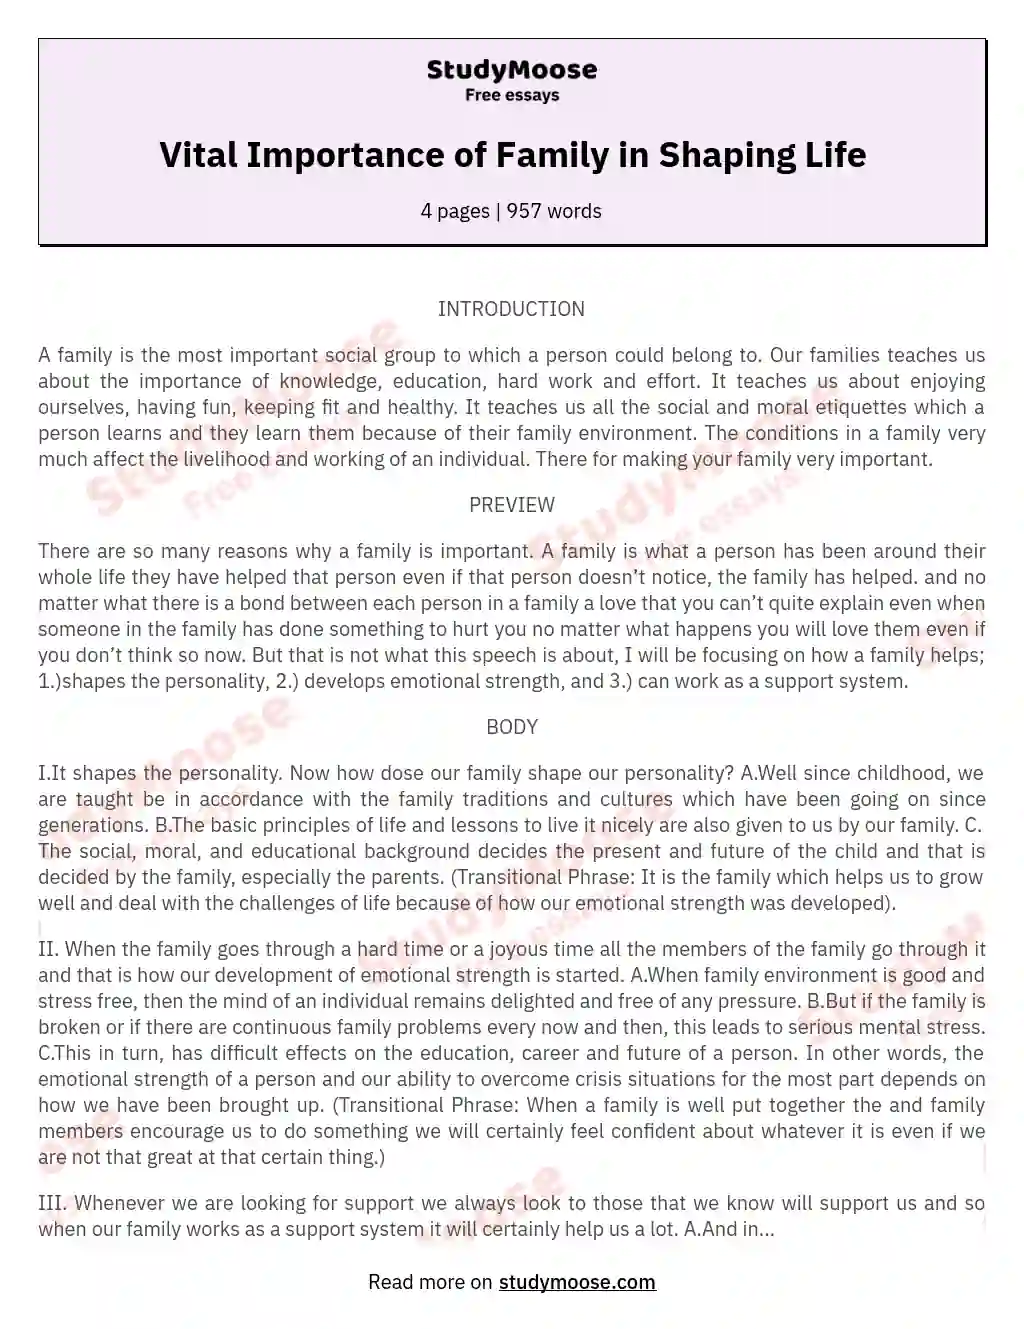 Vital Importance of Family in Shaping Life essay